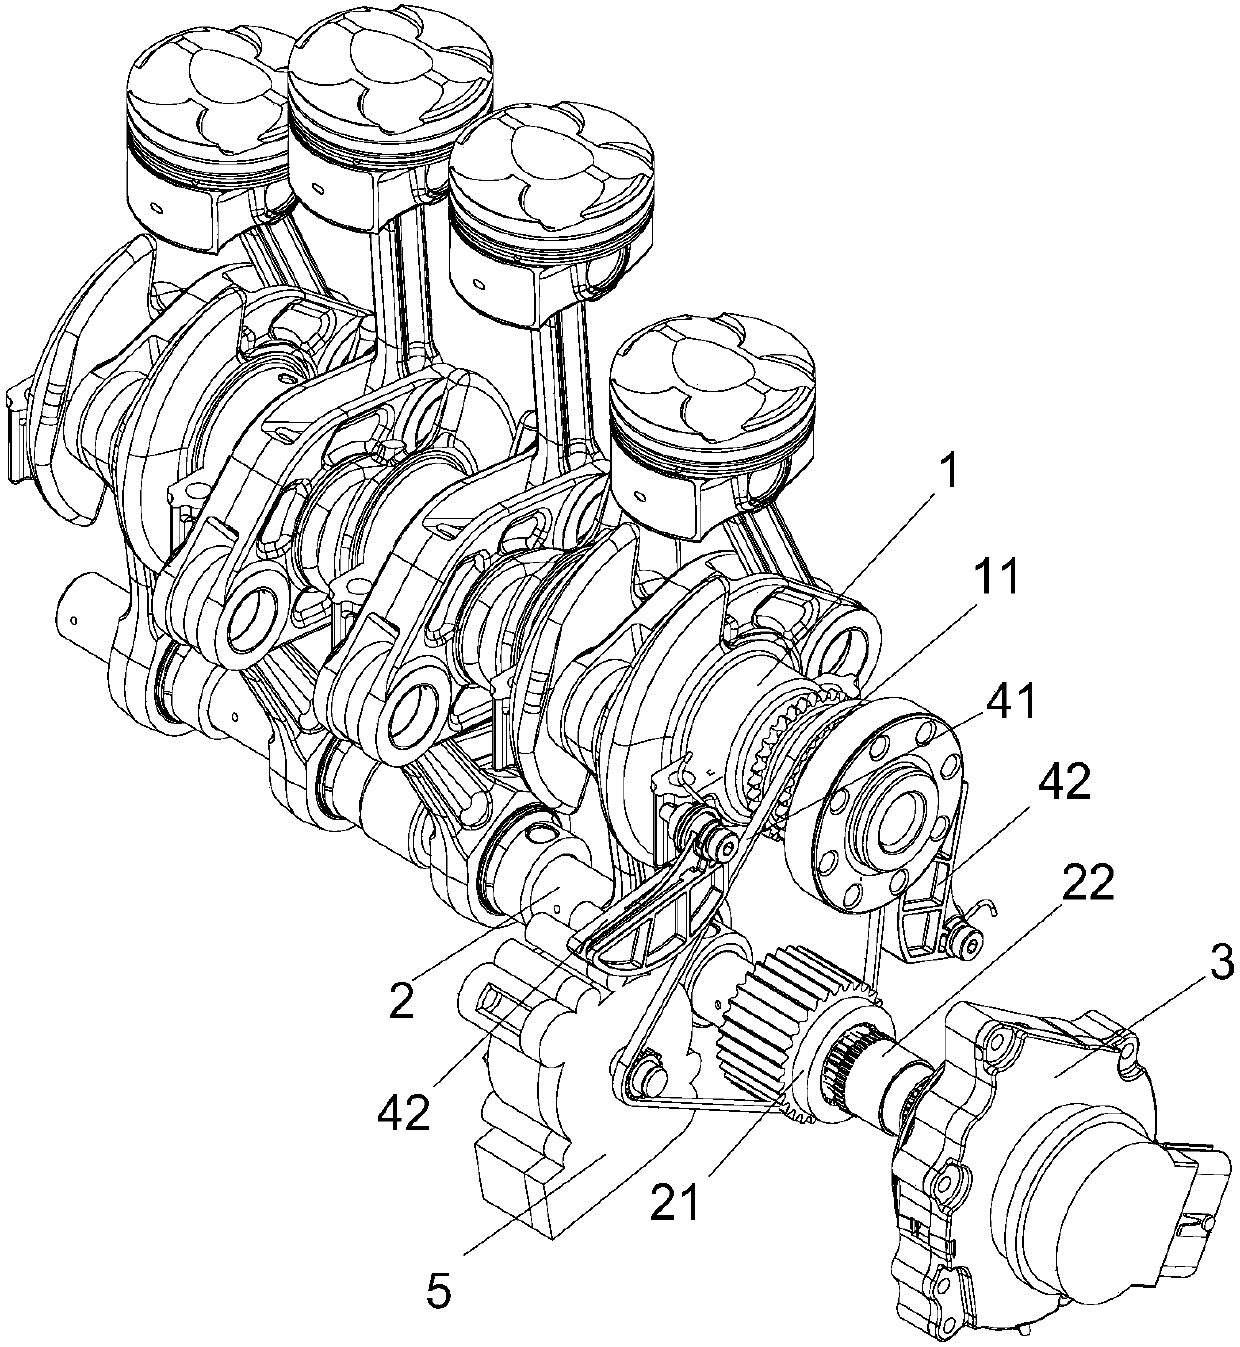 Eccentric shaft driving mechanism and variable compression ratio mechanism